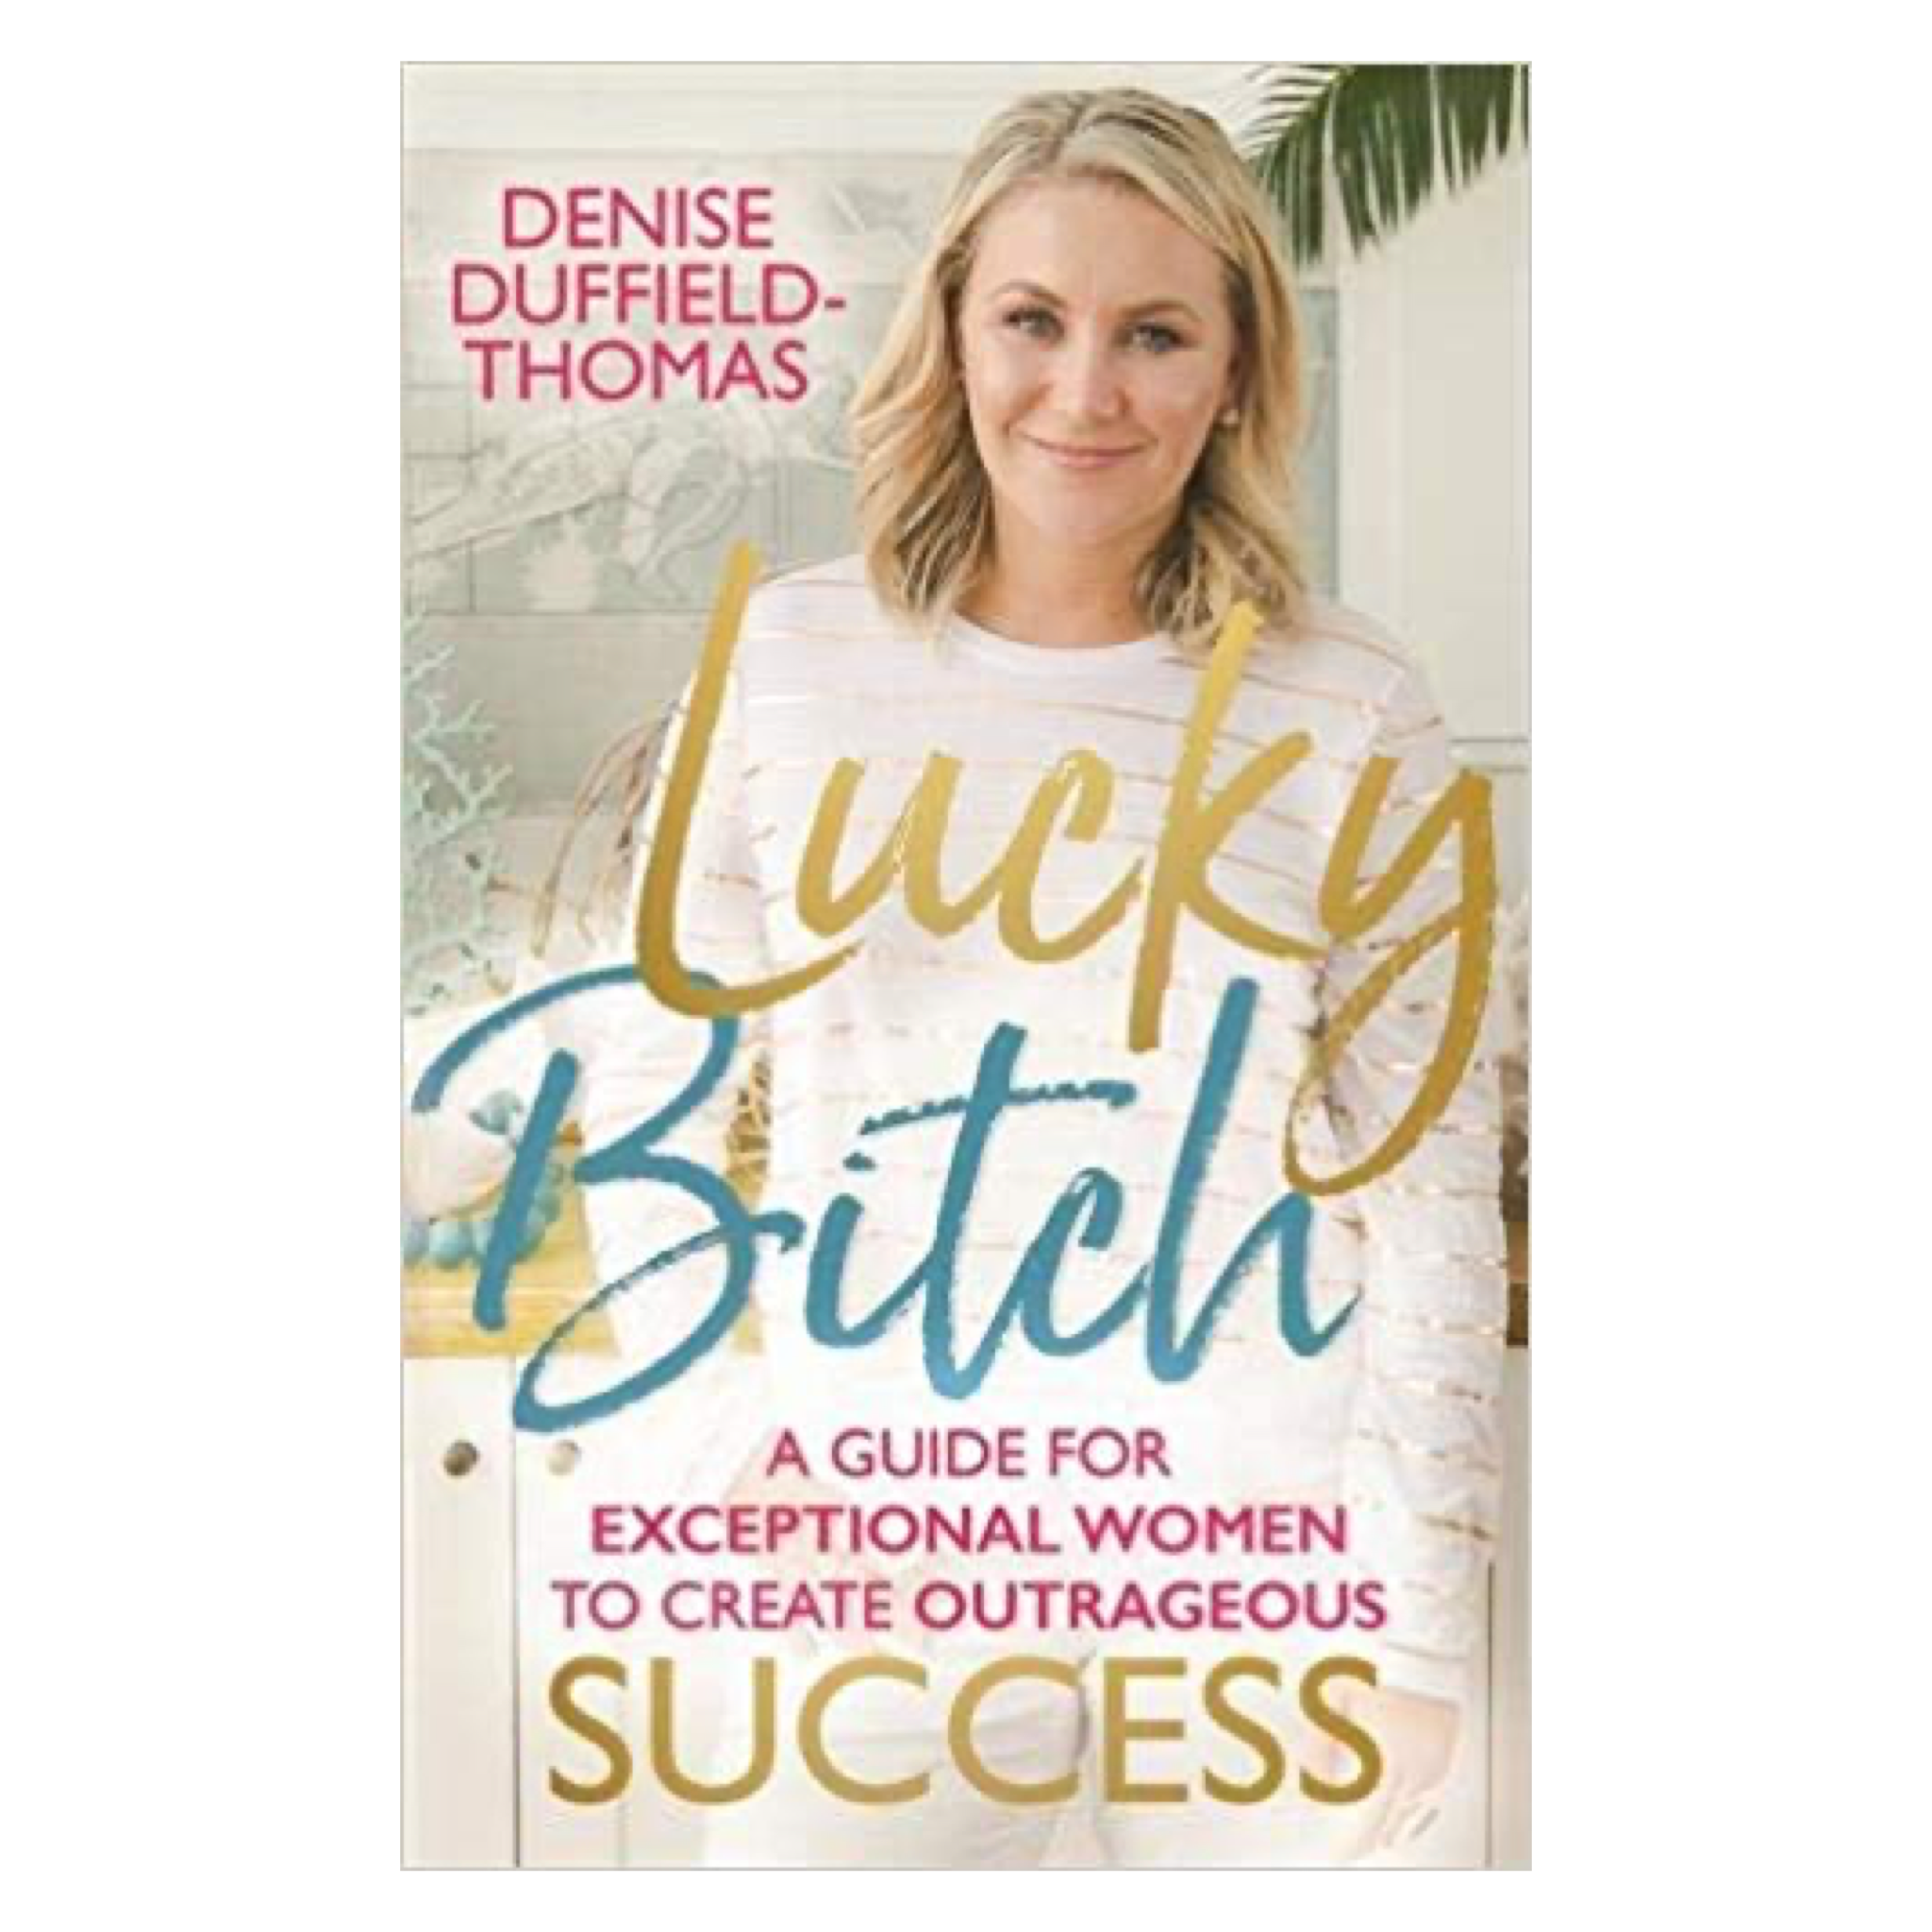 Lucky Bitch: A Guide for Exceptional Women to Create Outrageous Success by Denise Suffield Thomas